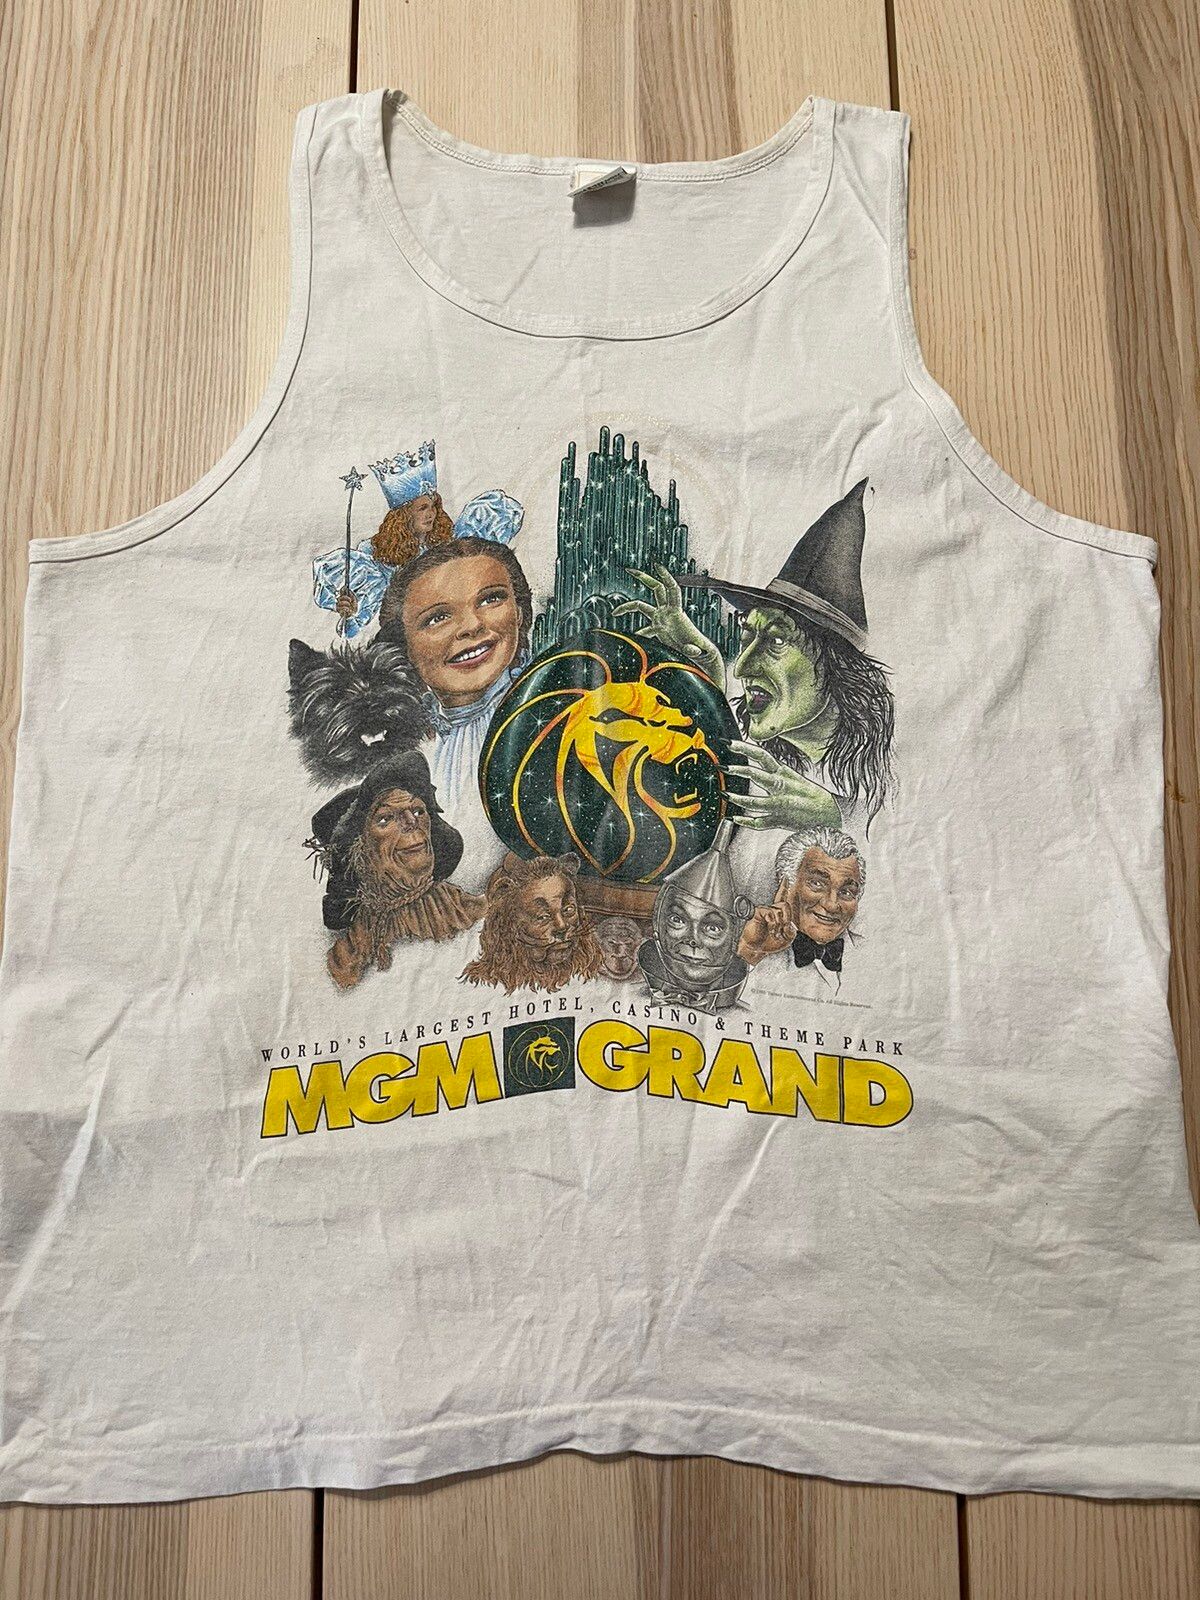 Vintage Vintage 1993 MGM Wizard Of Oz Cast Crew SS Tank Top Size US XL / EU 56 / 4 - 1 Preview